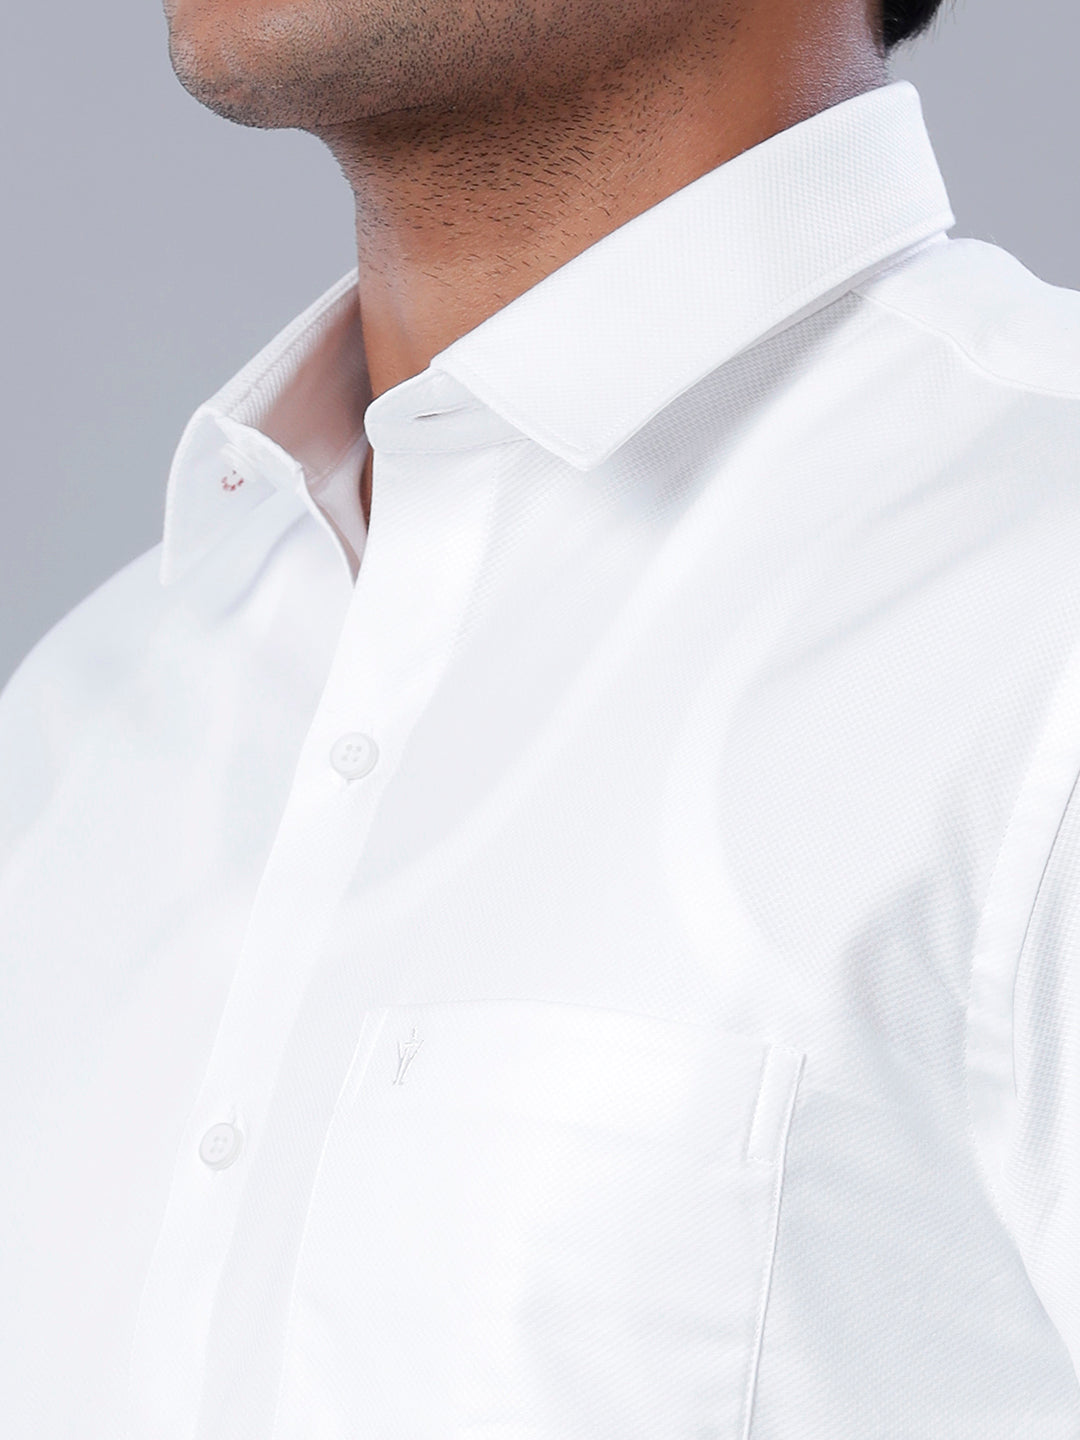 Mens Premium Pure Cotton White Shirt Full Sleeves Limited Edition 1-Zoom view